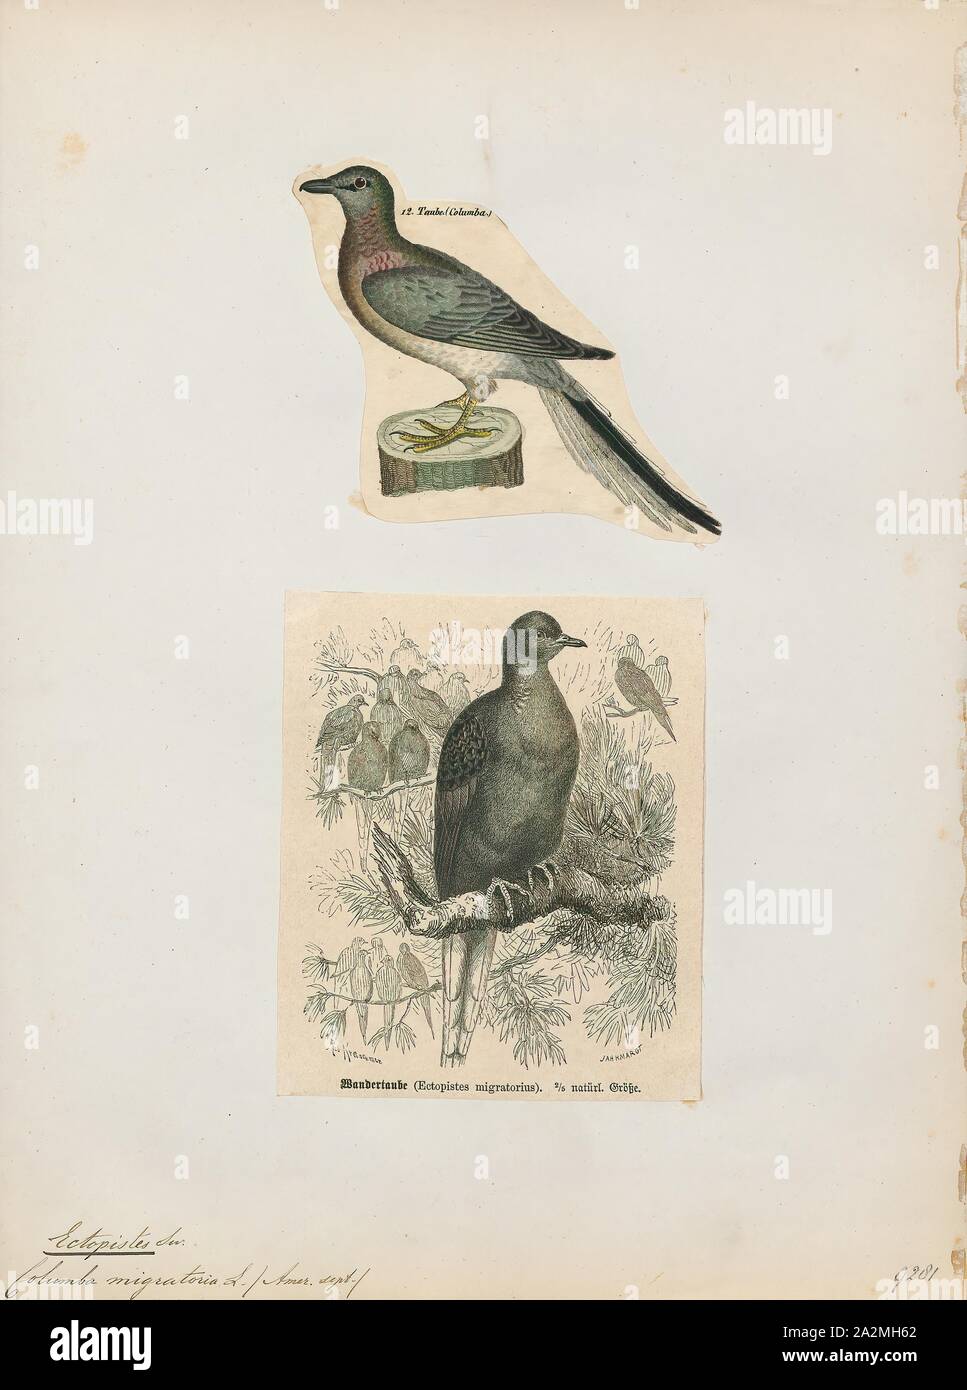 Ectopistes migratorius, Print, The passenger pigeon or wild pigeon (Ectopistes migratorius) is an extinct species of pigeon that was endemic to North America. Its common name is derived from the French word passager, meaning 'passing by Stock Photo